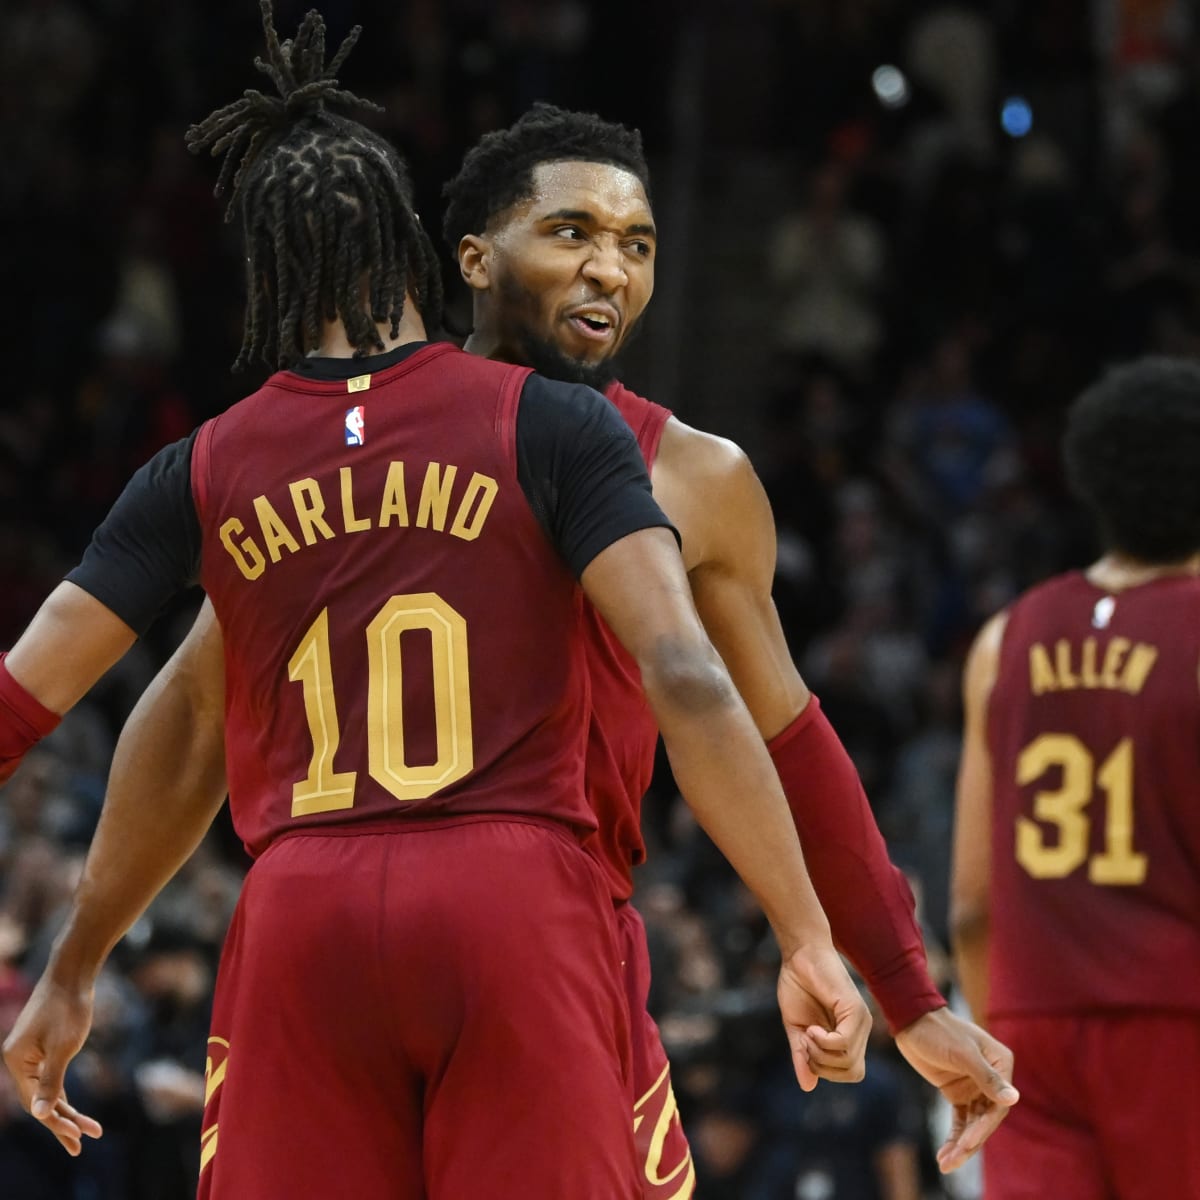 Cavaliers clinch playoff spot with 108-91 win over Rockets - The